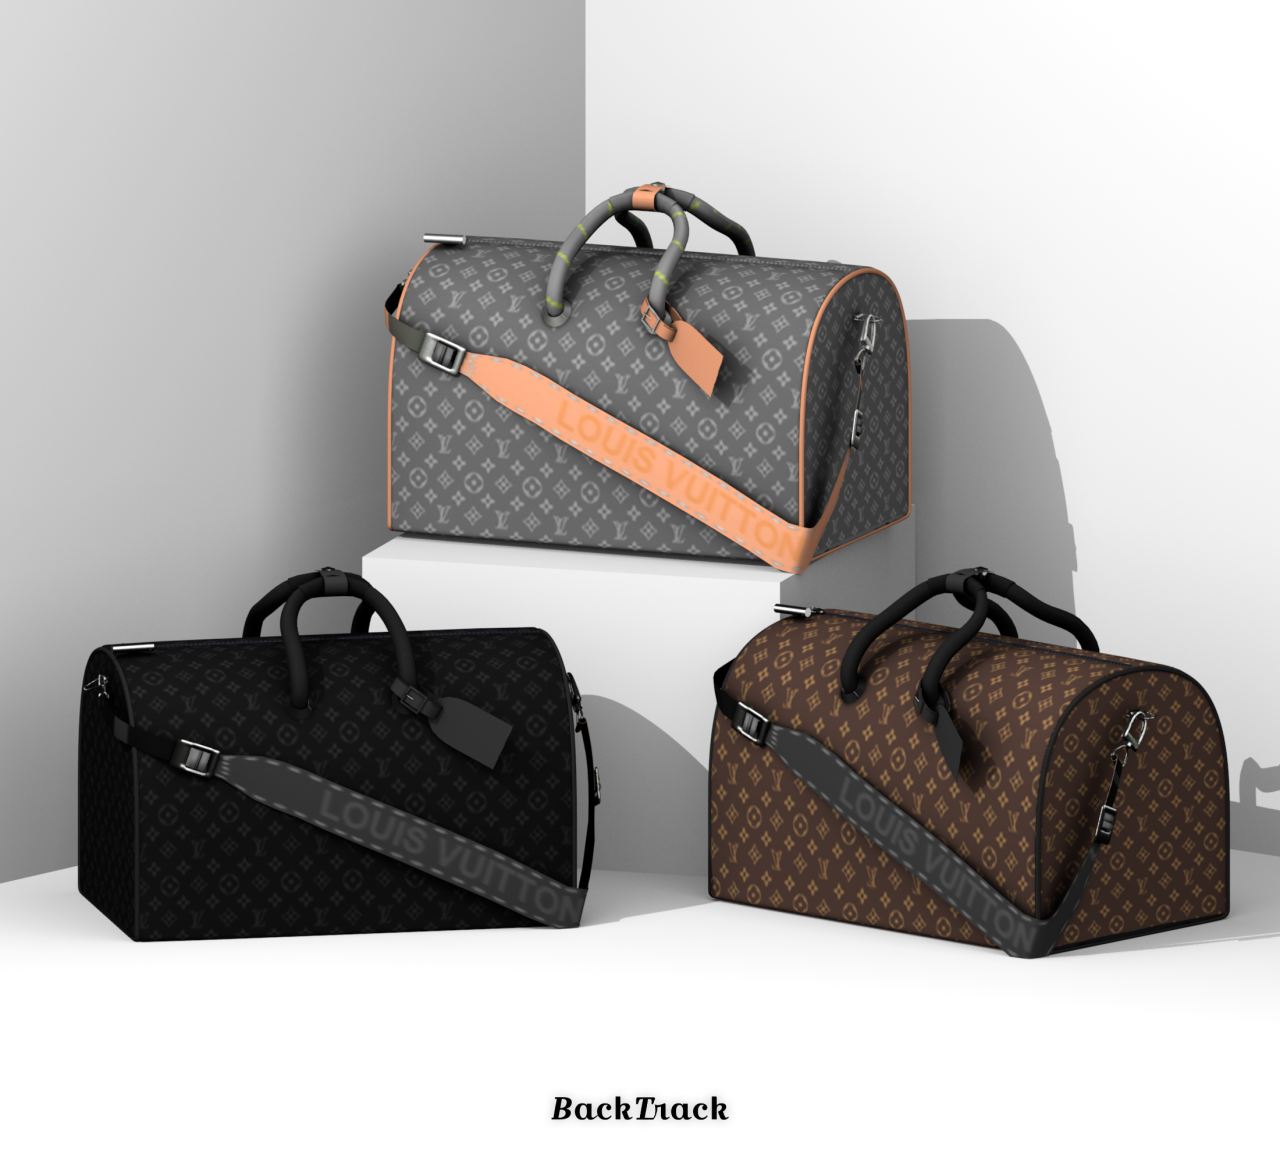 BackTrack — LV Bags + 8 Poses ( Early Access - Public 01/20 )